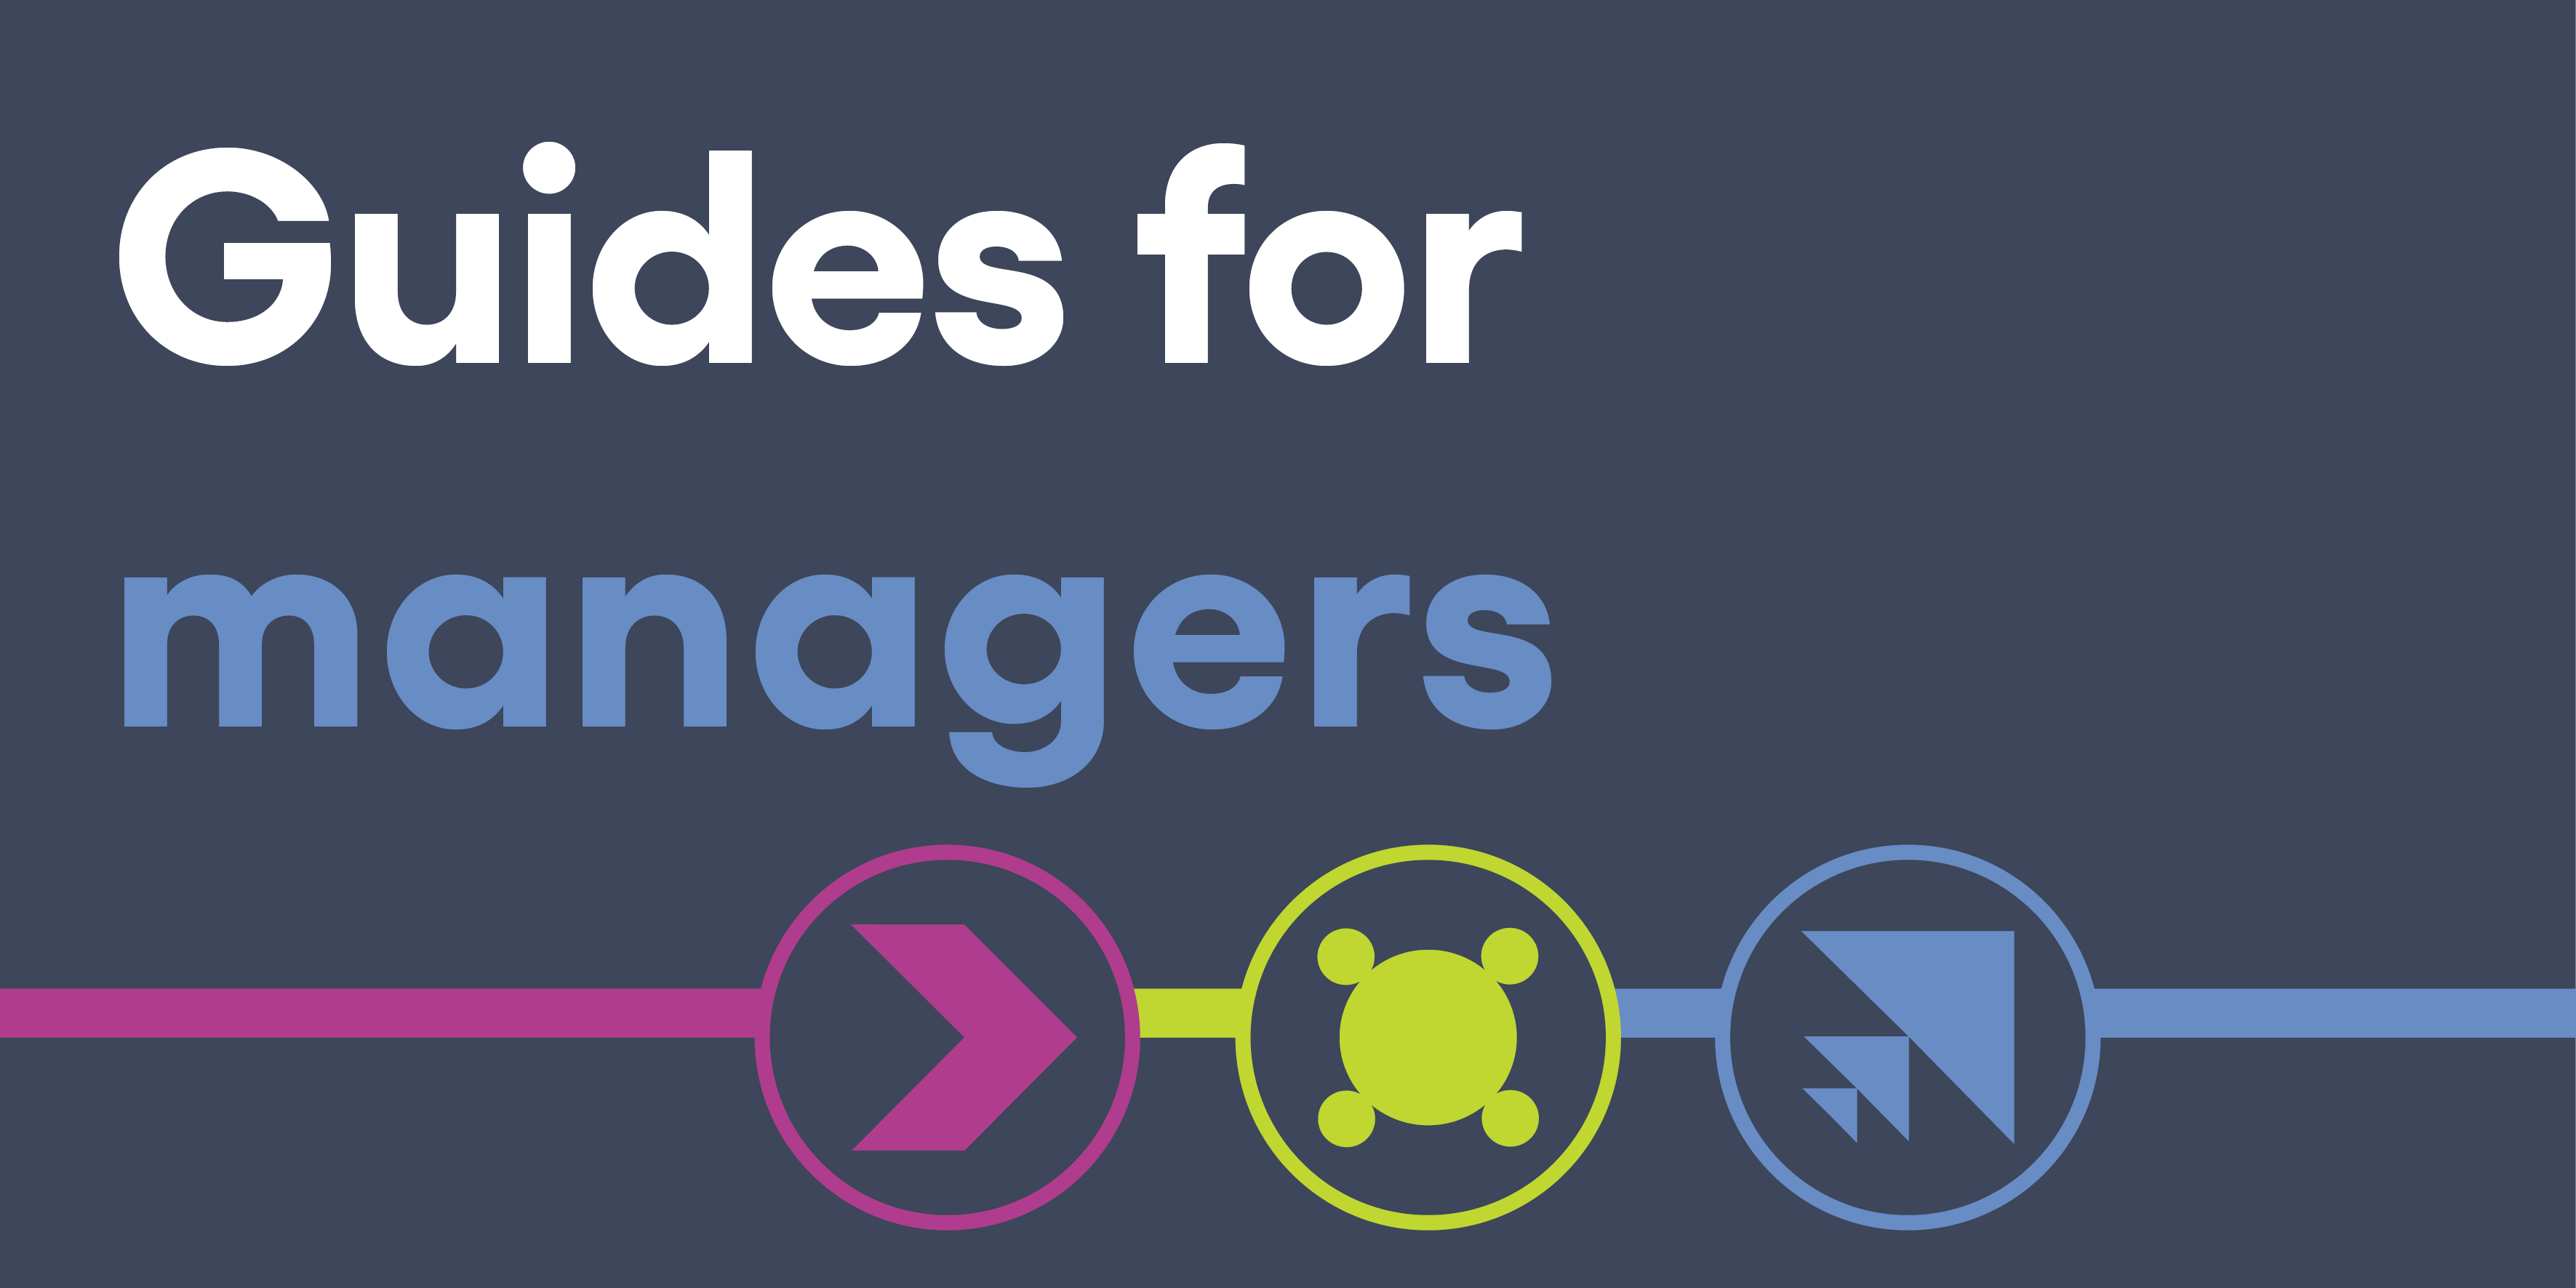 Guides for managers